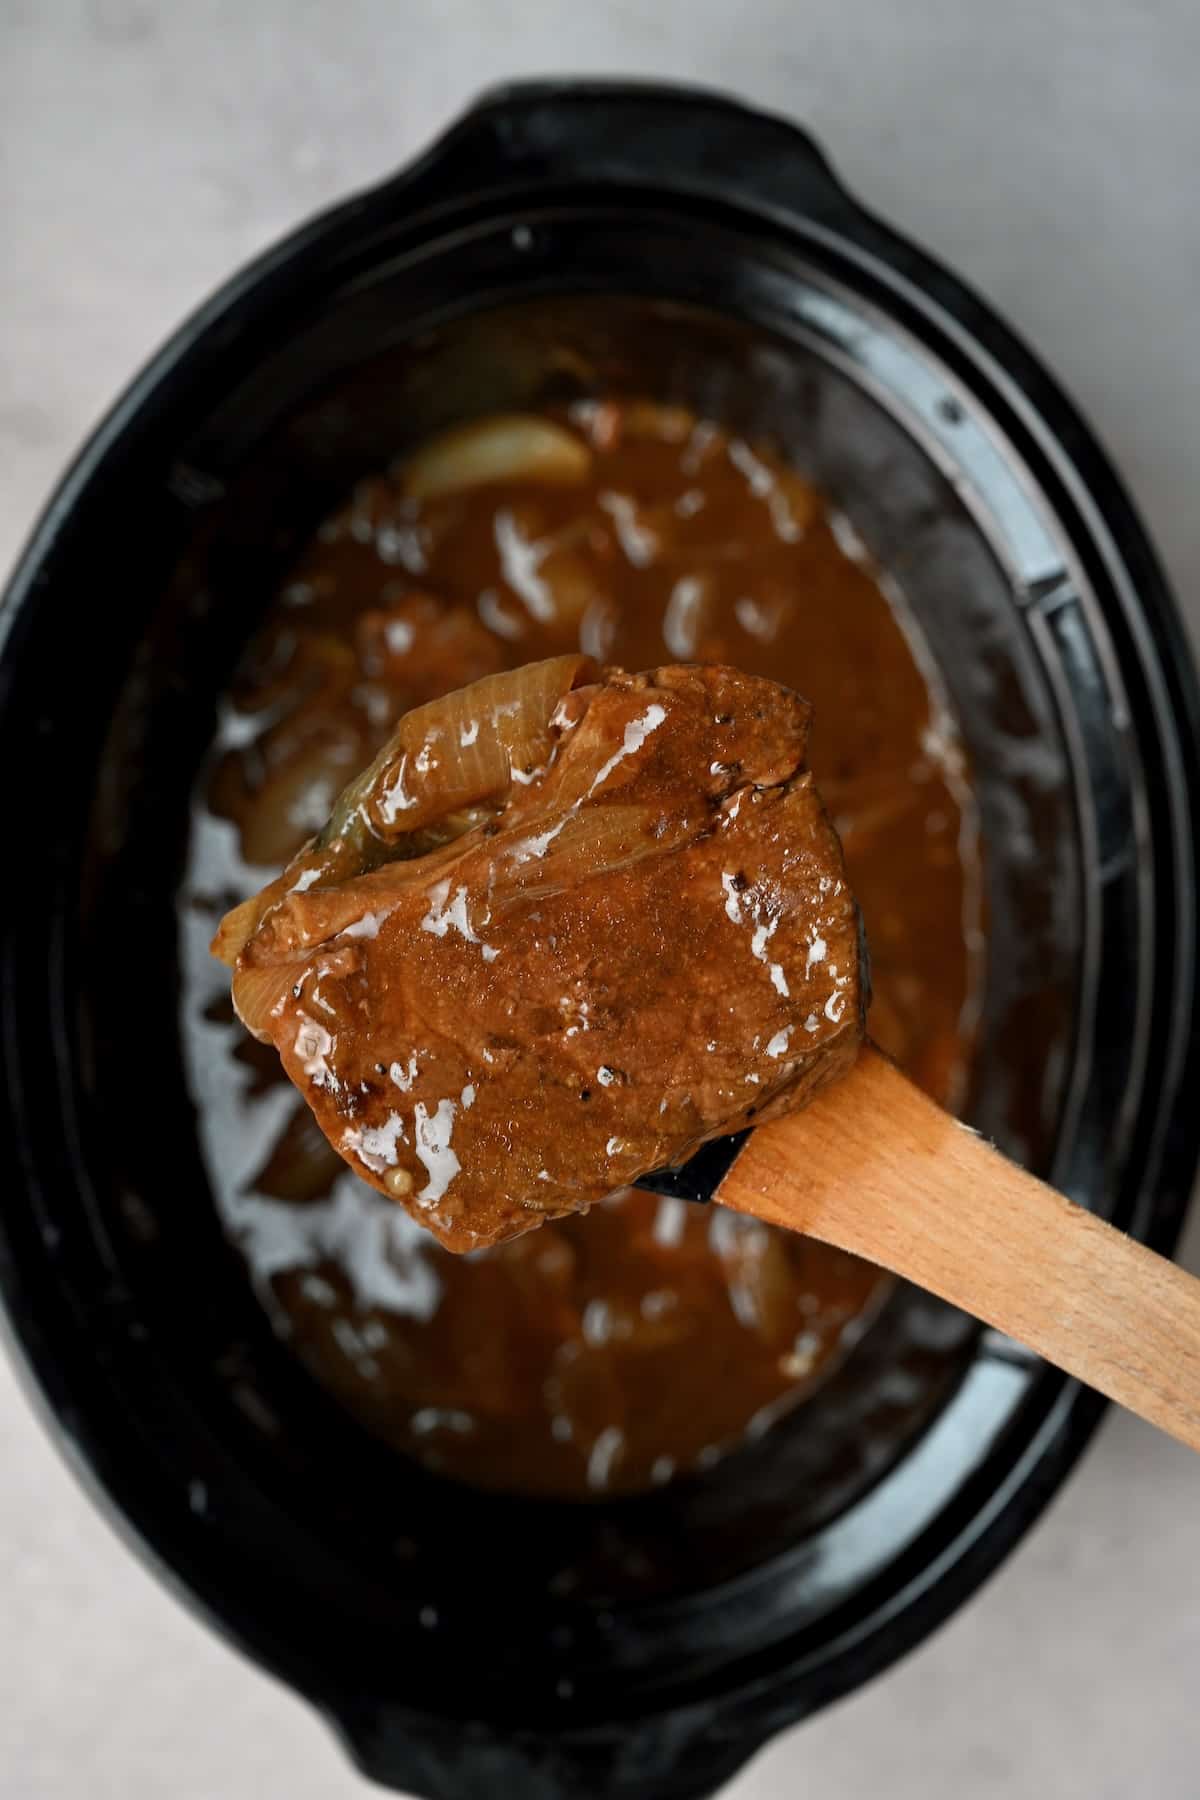 Steak and gravy cooked in a crockpot